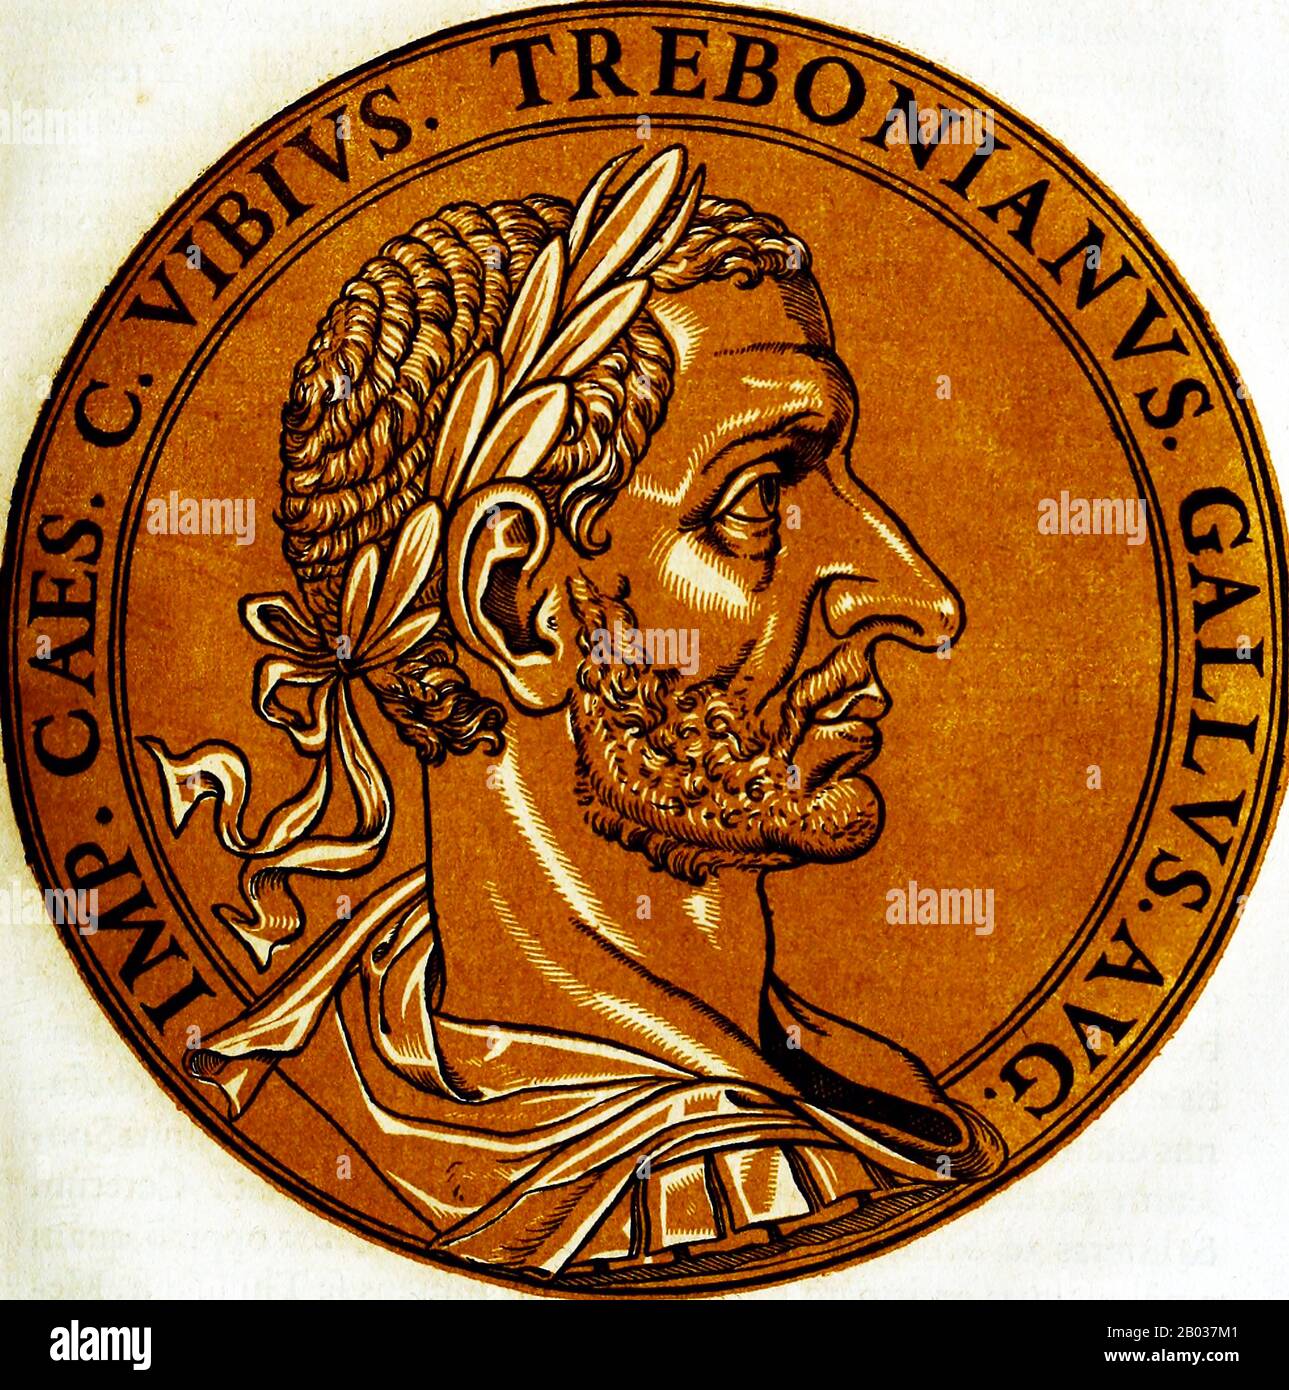 Trebonianus Gallus (206-253) was a respected politician and general in the Roman Empire, and rose to power after the deaths of co-Emperors Trajan Decius and his son Herennius Etruscus during the Battle of Abrittus in 251. Some rumours claim that Gallus had had a hand in the deaths of Decius and his son, having conspired with the Goth invaders.  His soldiers proclaimed Gallus emperor, but Decius' other son Hostilian had been acknowledged by the people of Rome as rightful heir. Not wishing to start another civil war, Gallus acquiesced to the will of the Roman people and adopted Hostilian as his Stock Photo